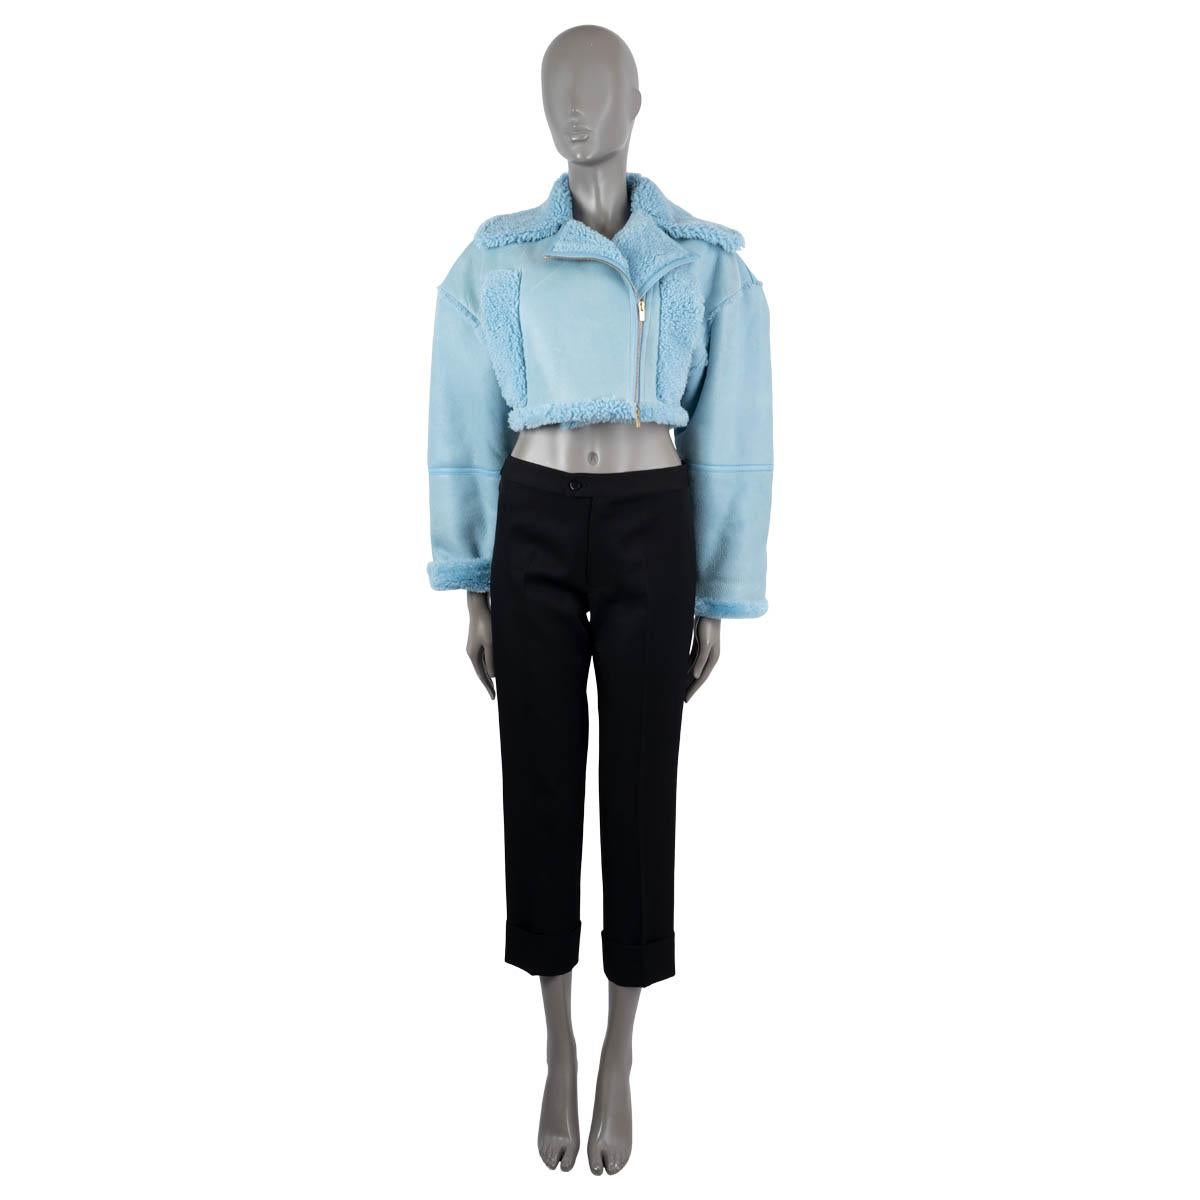 100% authentic Jacquemus Paiou biker jacket in light blue leather and shearling. Features side pockets in shearling and a cropped silhouette. Opens with asymmetric zipper on the front. Lined in shearling. Has never been worn but shows some slight